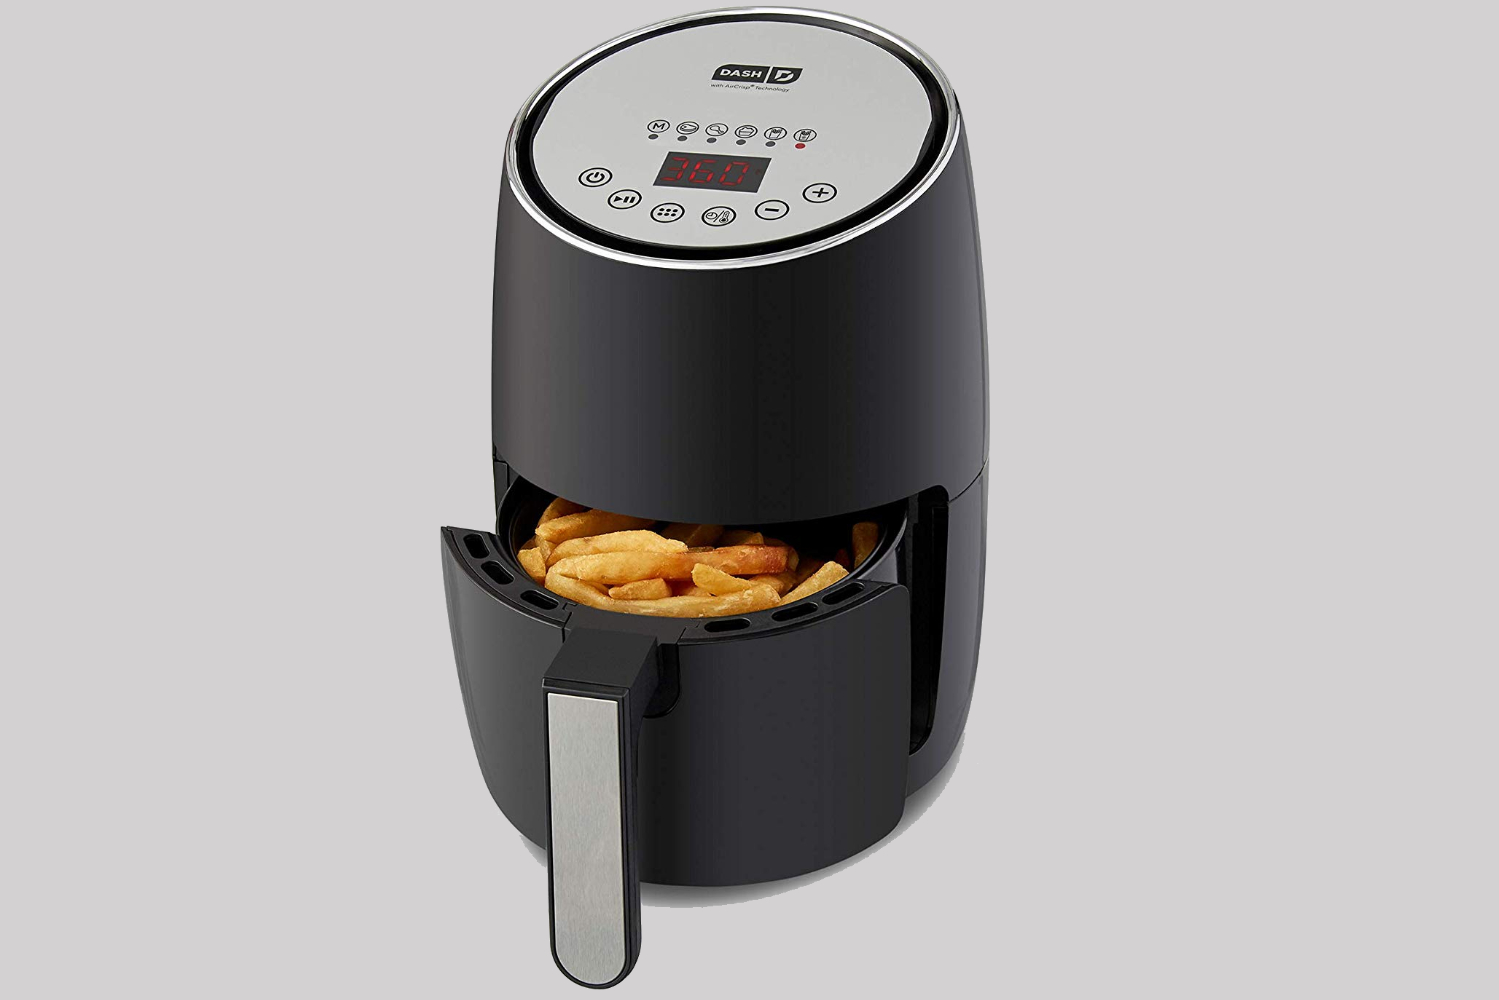  DASH Compact Air Fryer Oven Cooker with Temperature